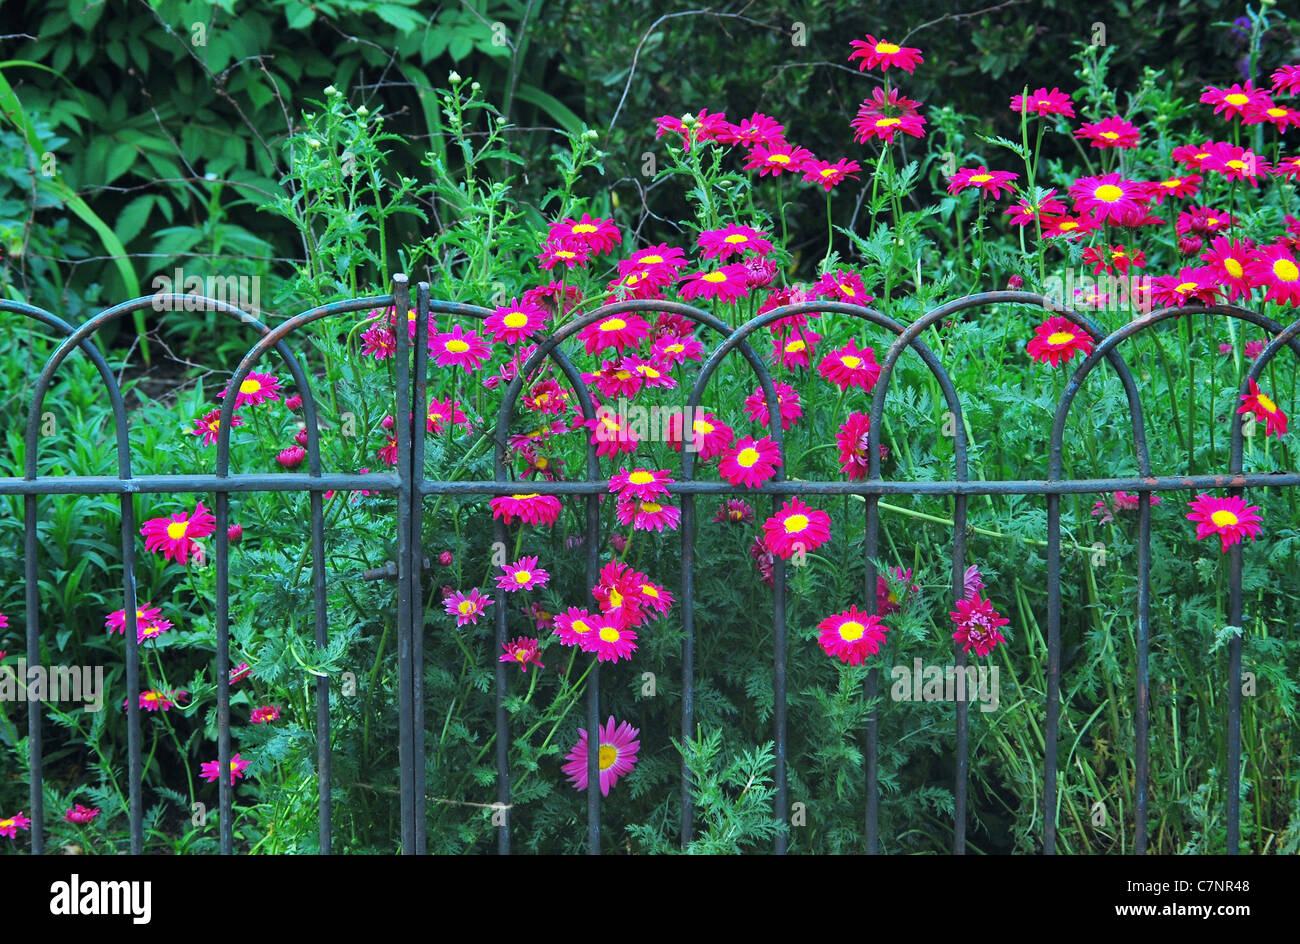 Colorful flowers swarming through an old picket fence in St. James's Park in London, England. Stock Photo